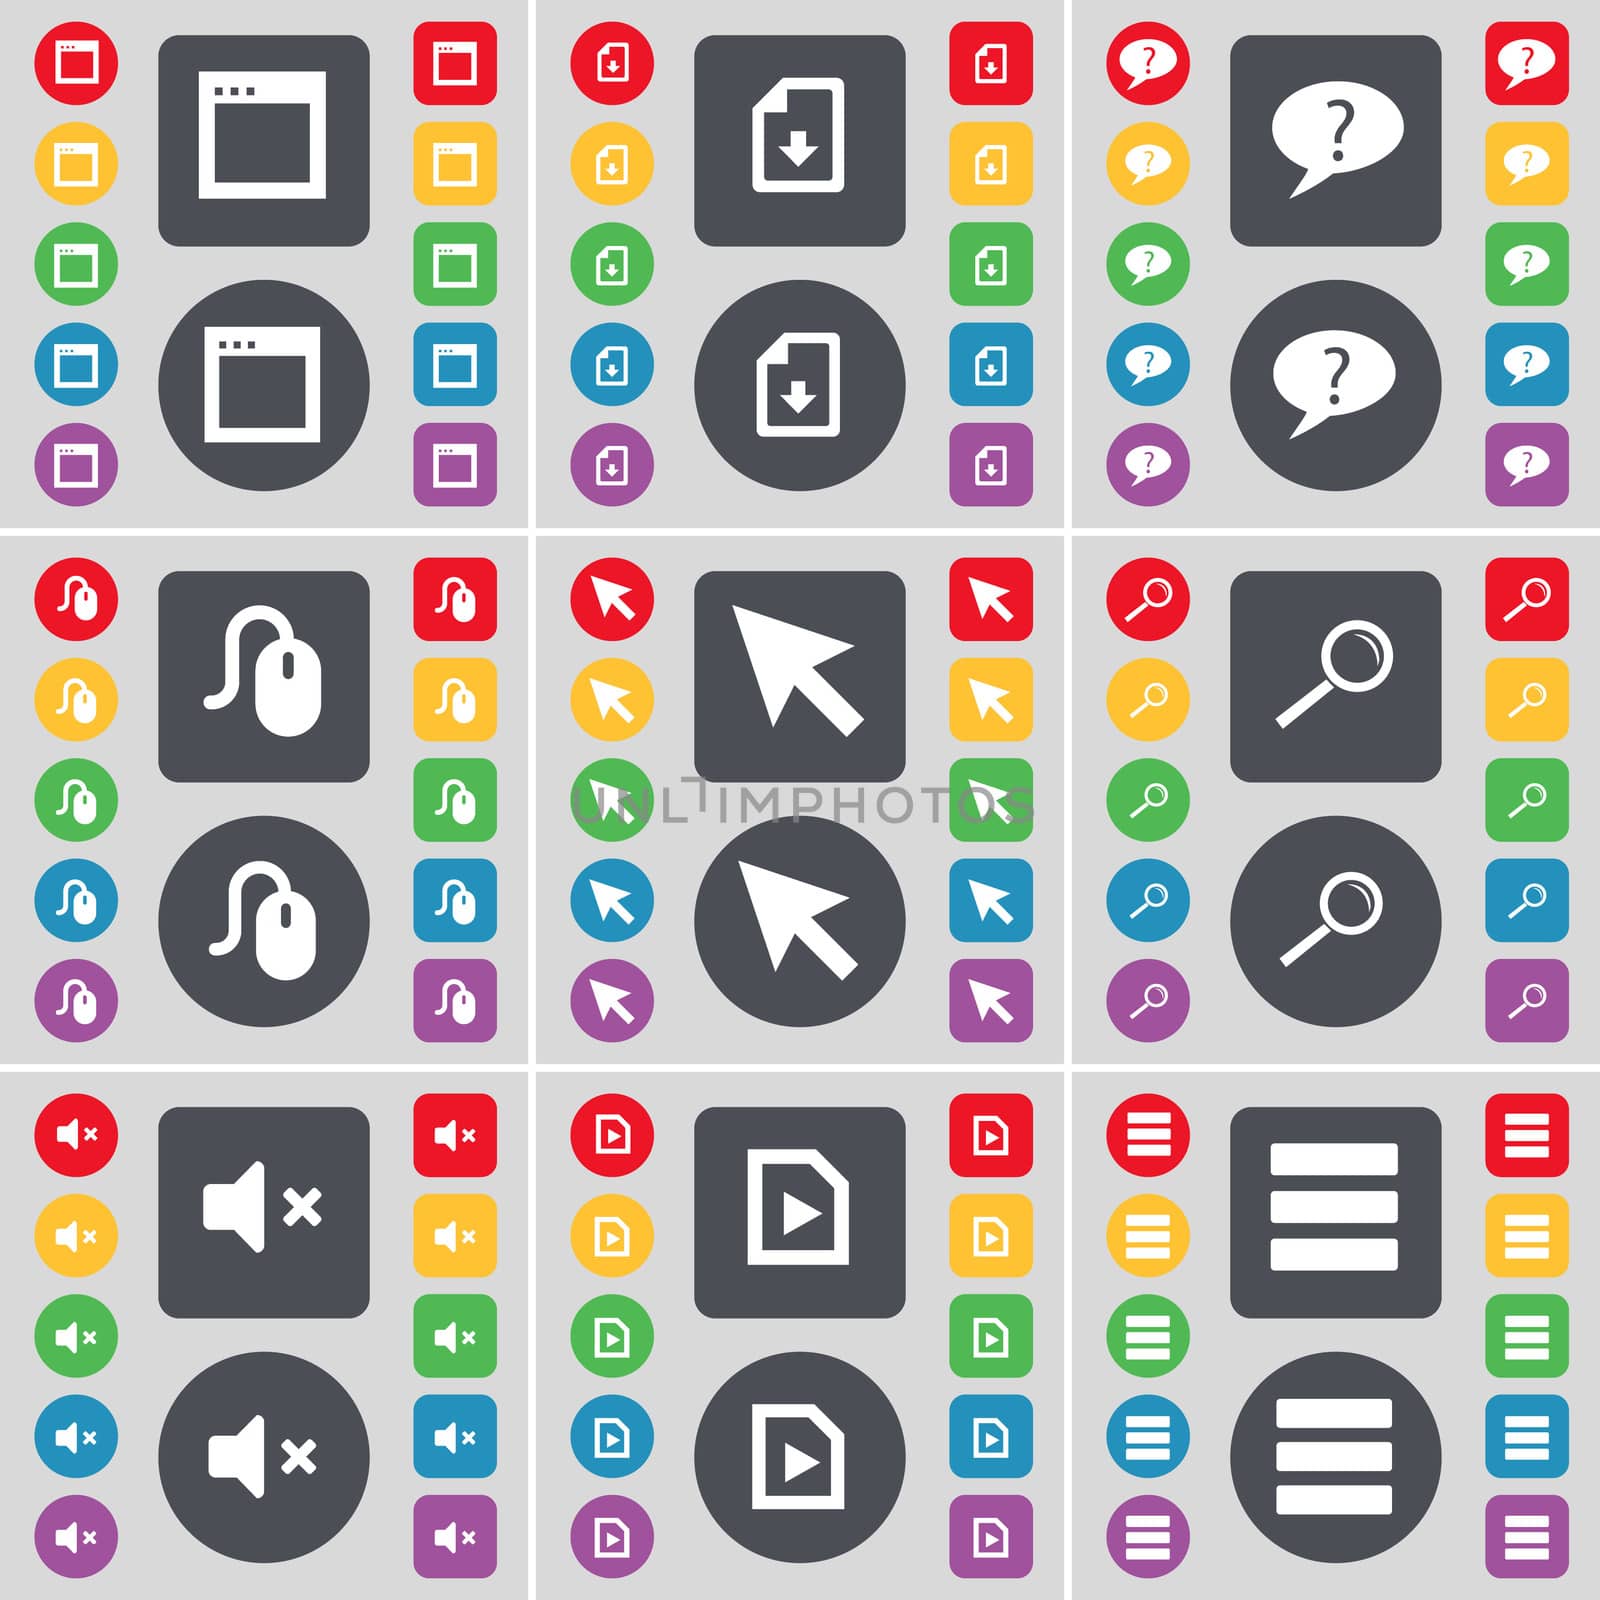 Window, Dowload file, Chat bubble, Mouse, Cursor, Magnifying glass, Mute, Media file, Apps icon symbol. A large set of flat, colored buttons for your design. illustration